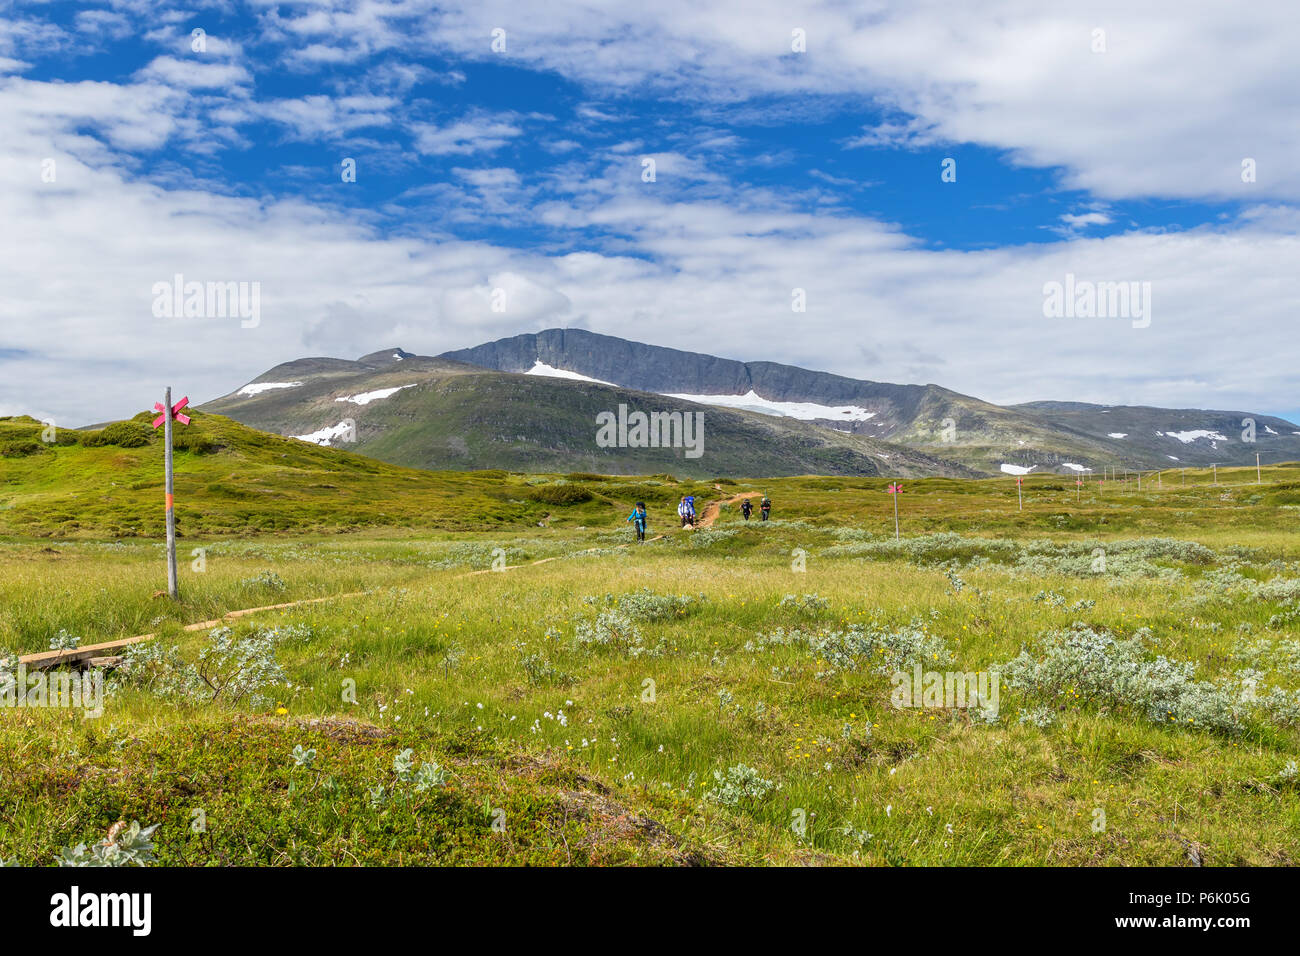 Hiking trail with hikers in Helag's mountain scenery in Sweden Stock Photo